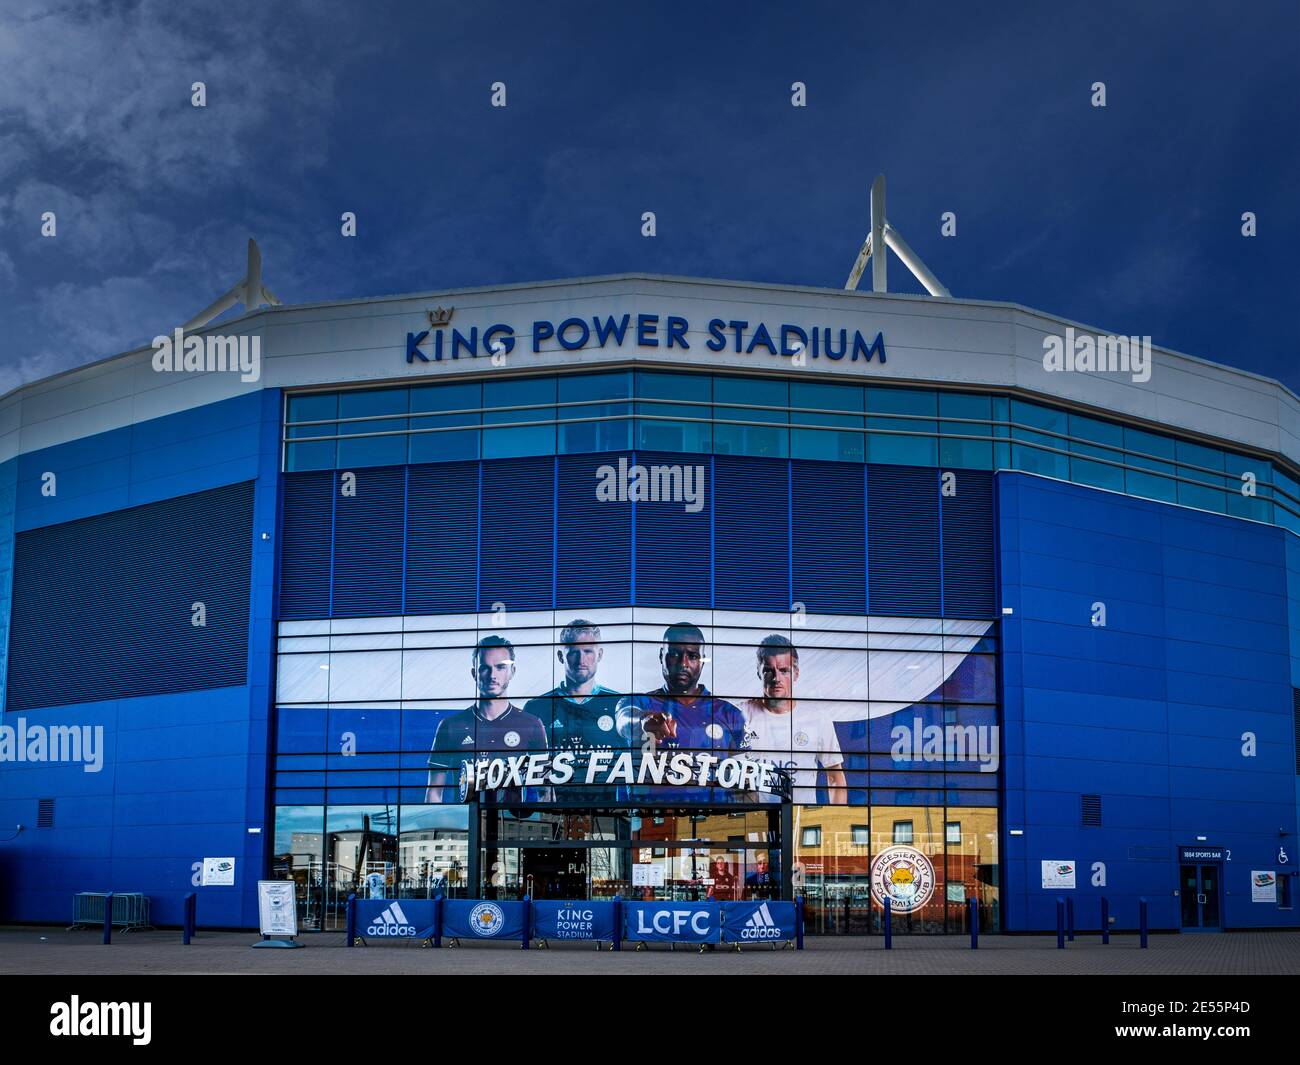 Il King Power Stadium, sede del Leicester City Football Club. Foto Stock